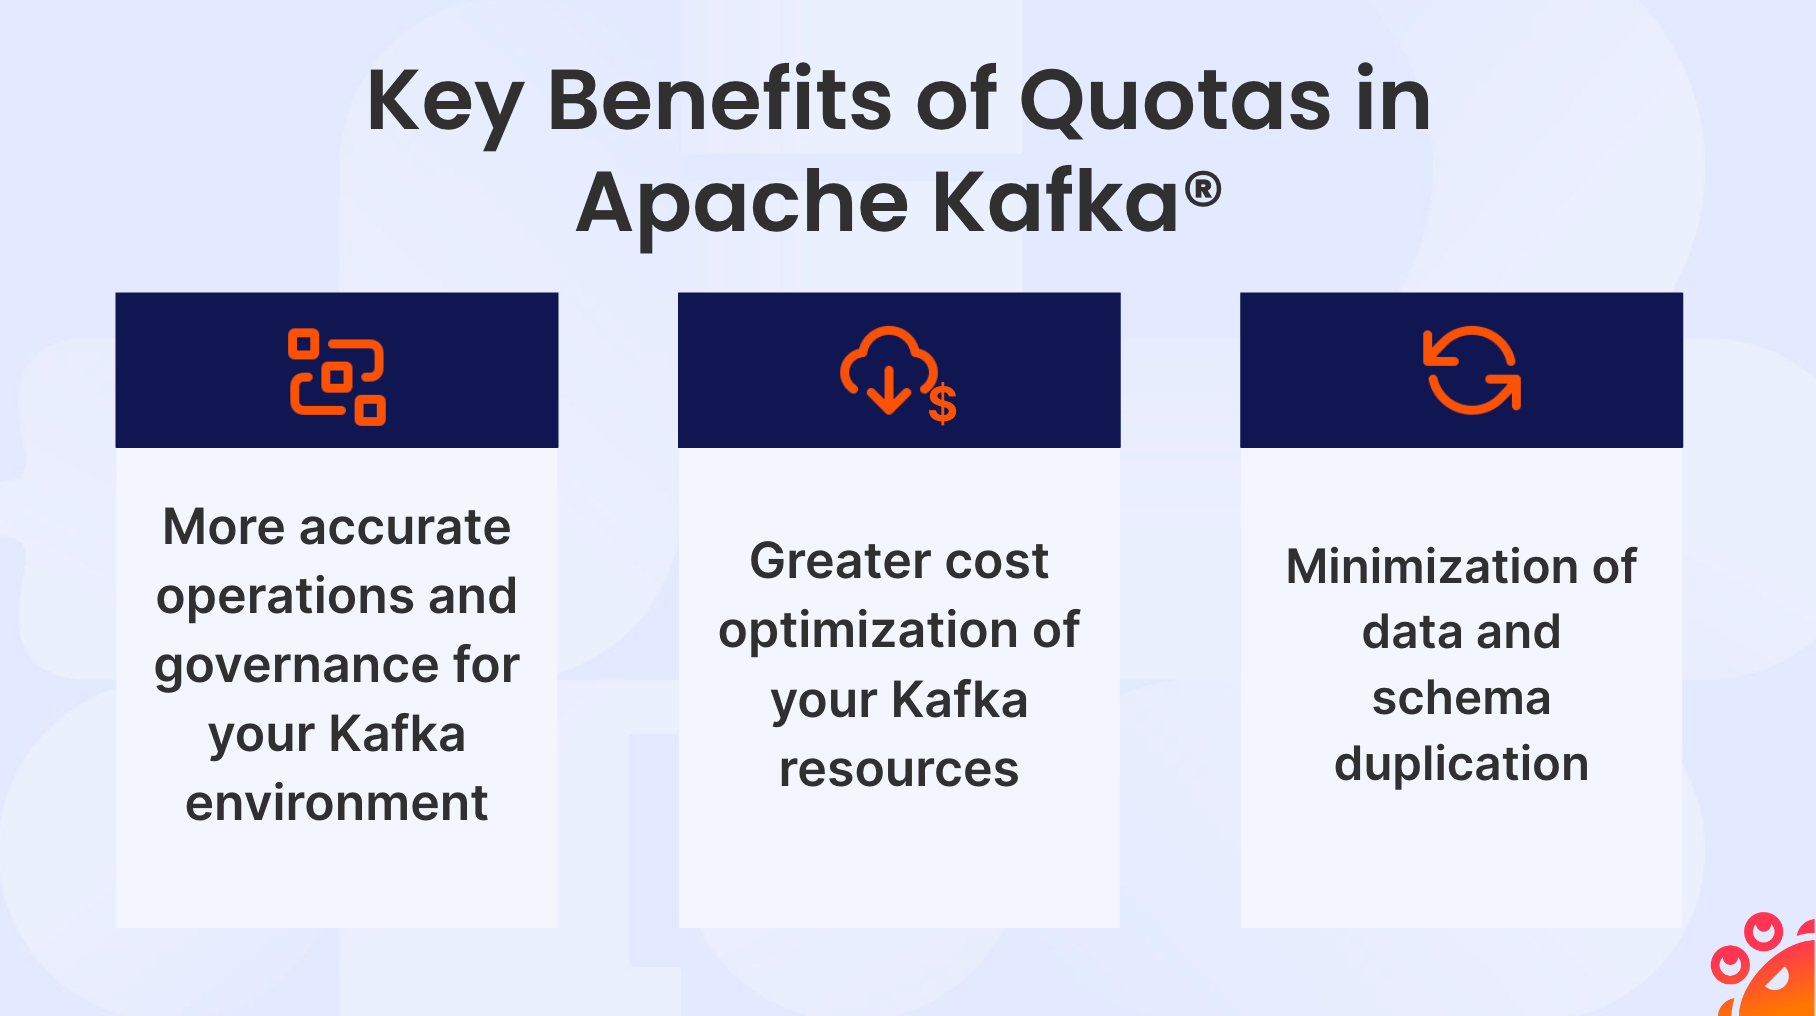 Key benefits of quotas in Apache Kafka: more accurate operations and governance for your Kafka environment, Greater cost optimization of your Kafka resources, Minimization of date and schema duplication